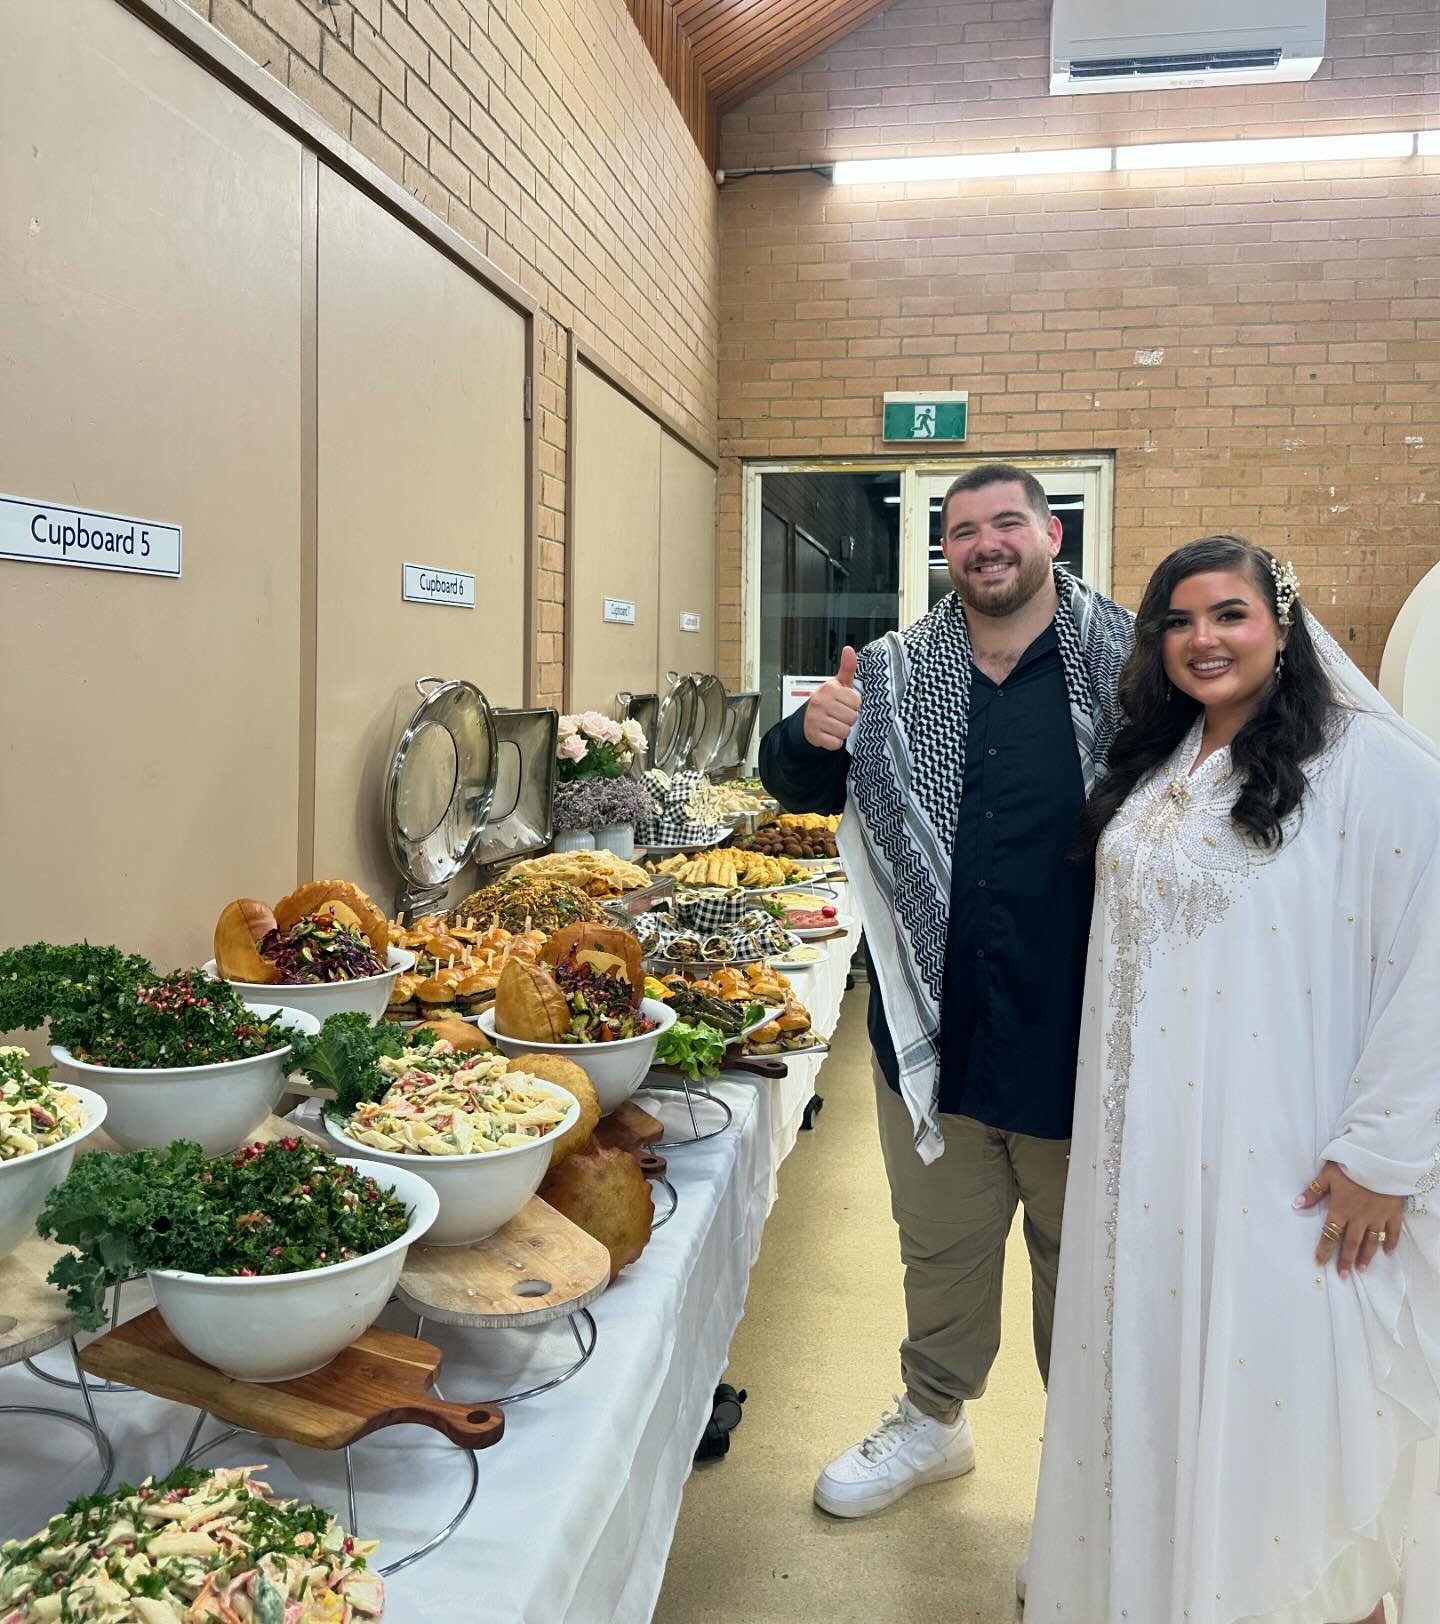 Planning your next event? 🥳 We&rsquo;ve got you covered from authentic food to mouth-watering desserts. Visit our website to view our menu and send an enquiry for your next event! 

#catering #lebanesecuisine #lebanesefood #sydneyfood #sydneycaterin